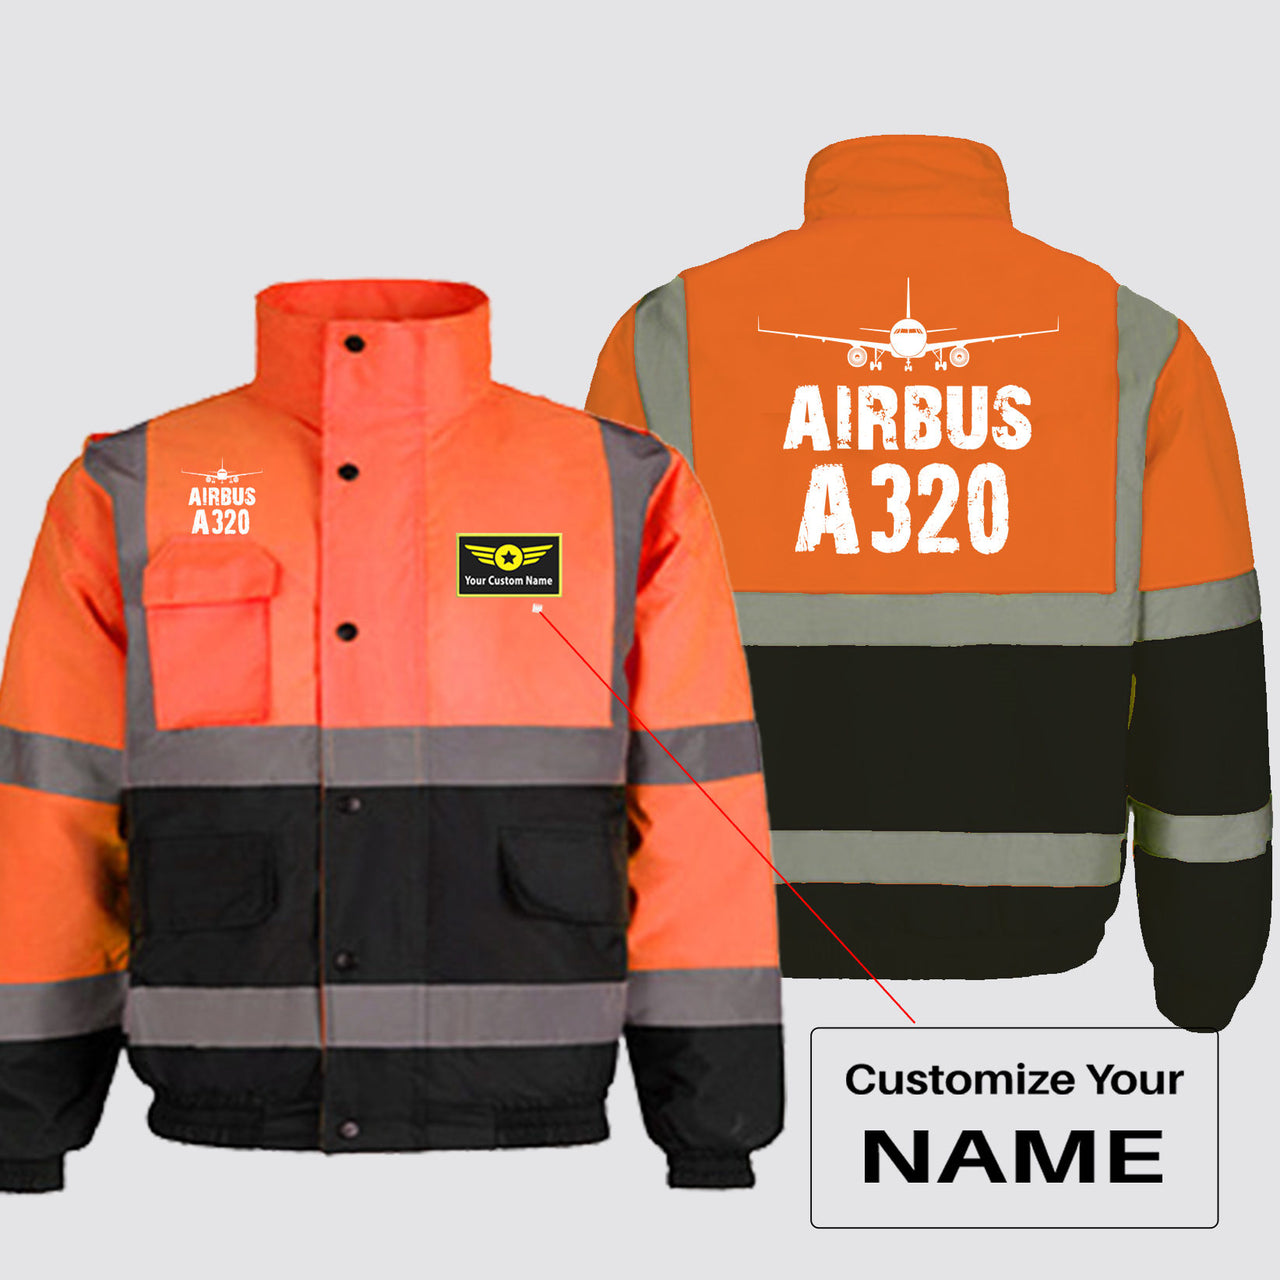 Airbus A320 & Plane Designed Reflective Winter Jackets